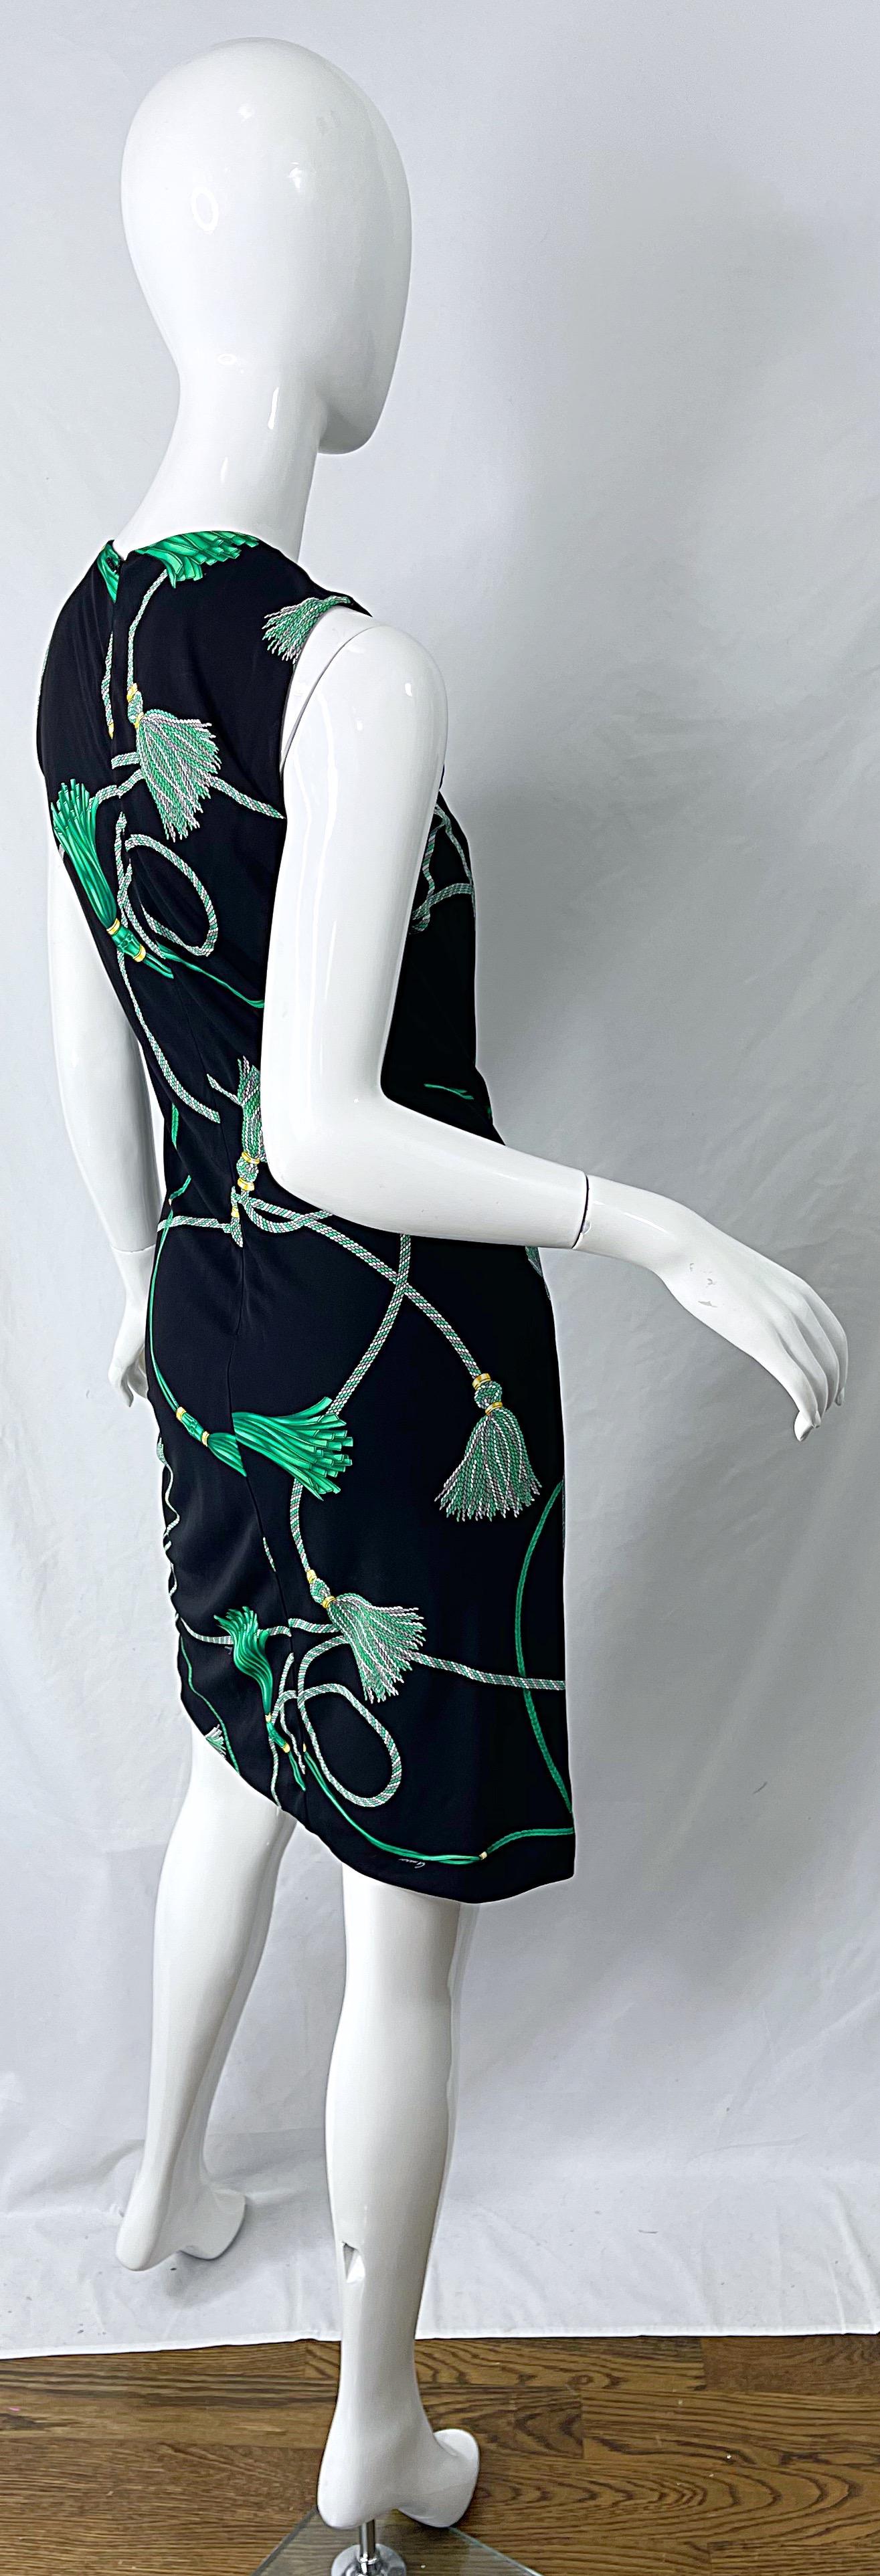 Gucci 2007 Black and Green Logo Tassel Print Rayon Jersey Faux Wrap Dress In Excellent Condition For Sale In San Diego, CA